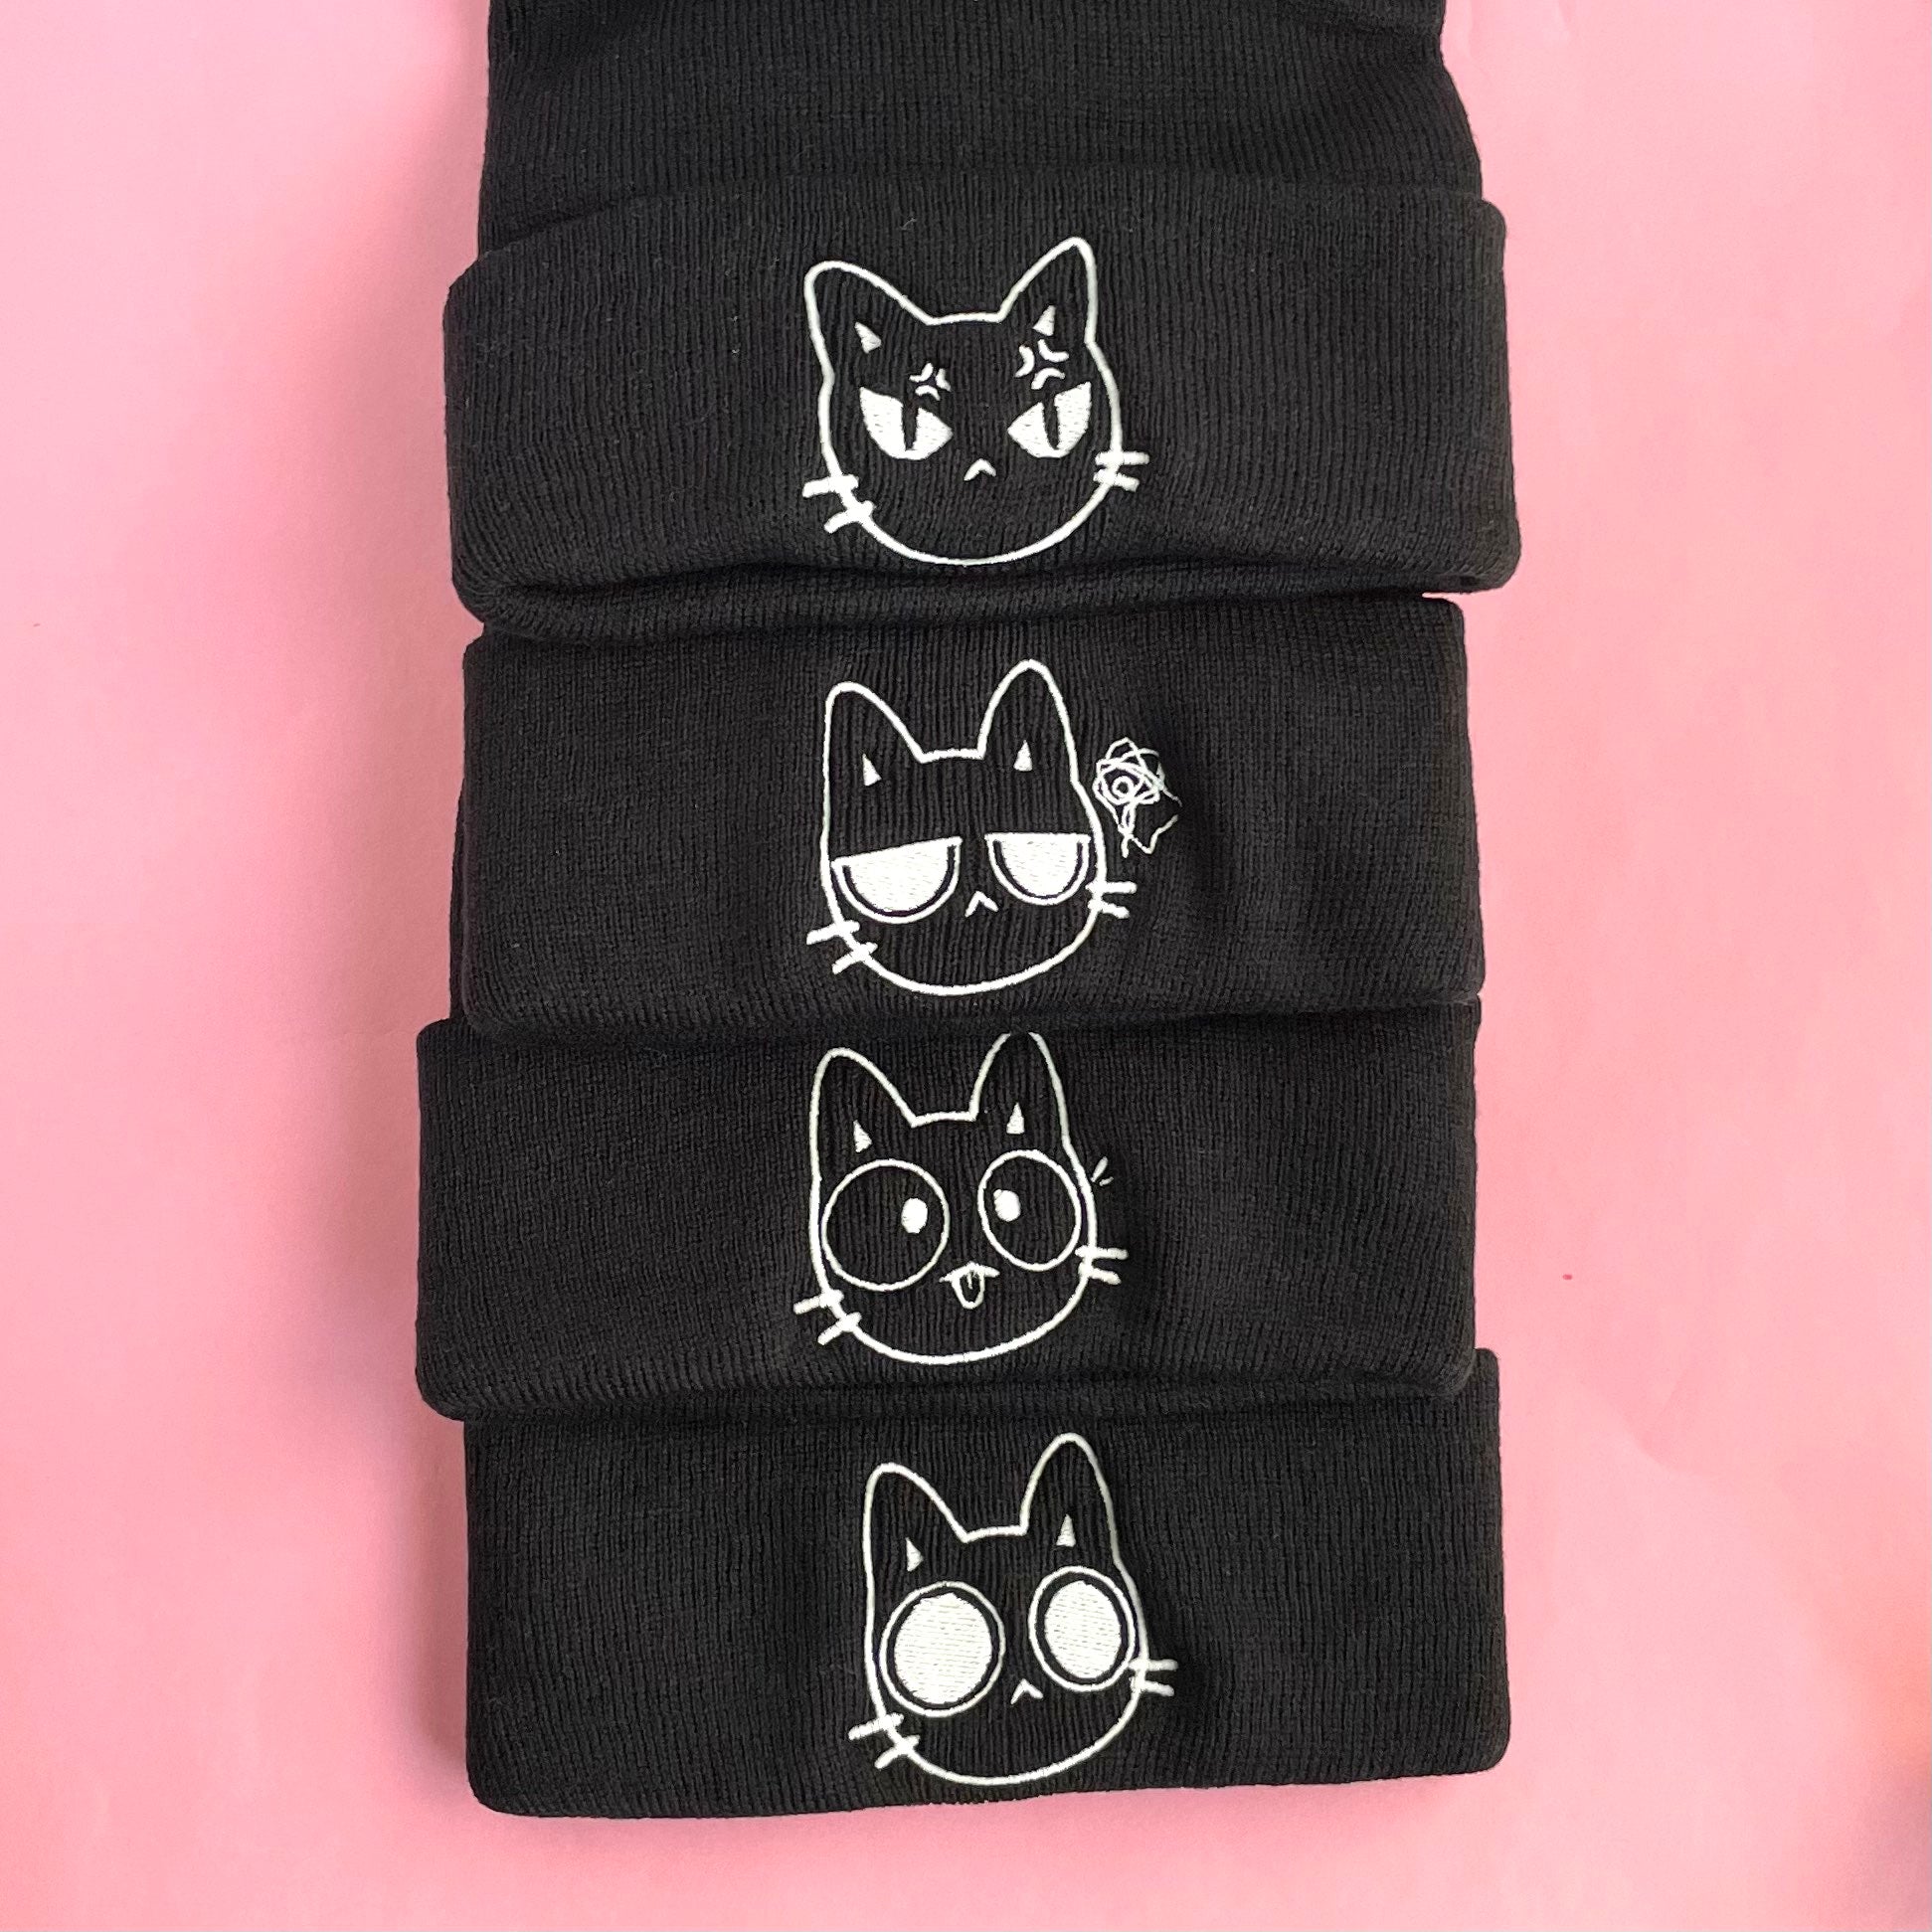 CHOOSE YOUR CAT EXPRESSION EMBROIDERED BEANIE, GLOW IN THE DARK